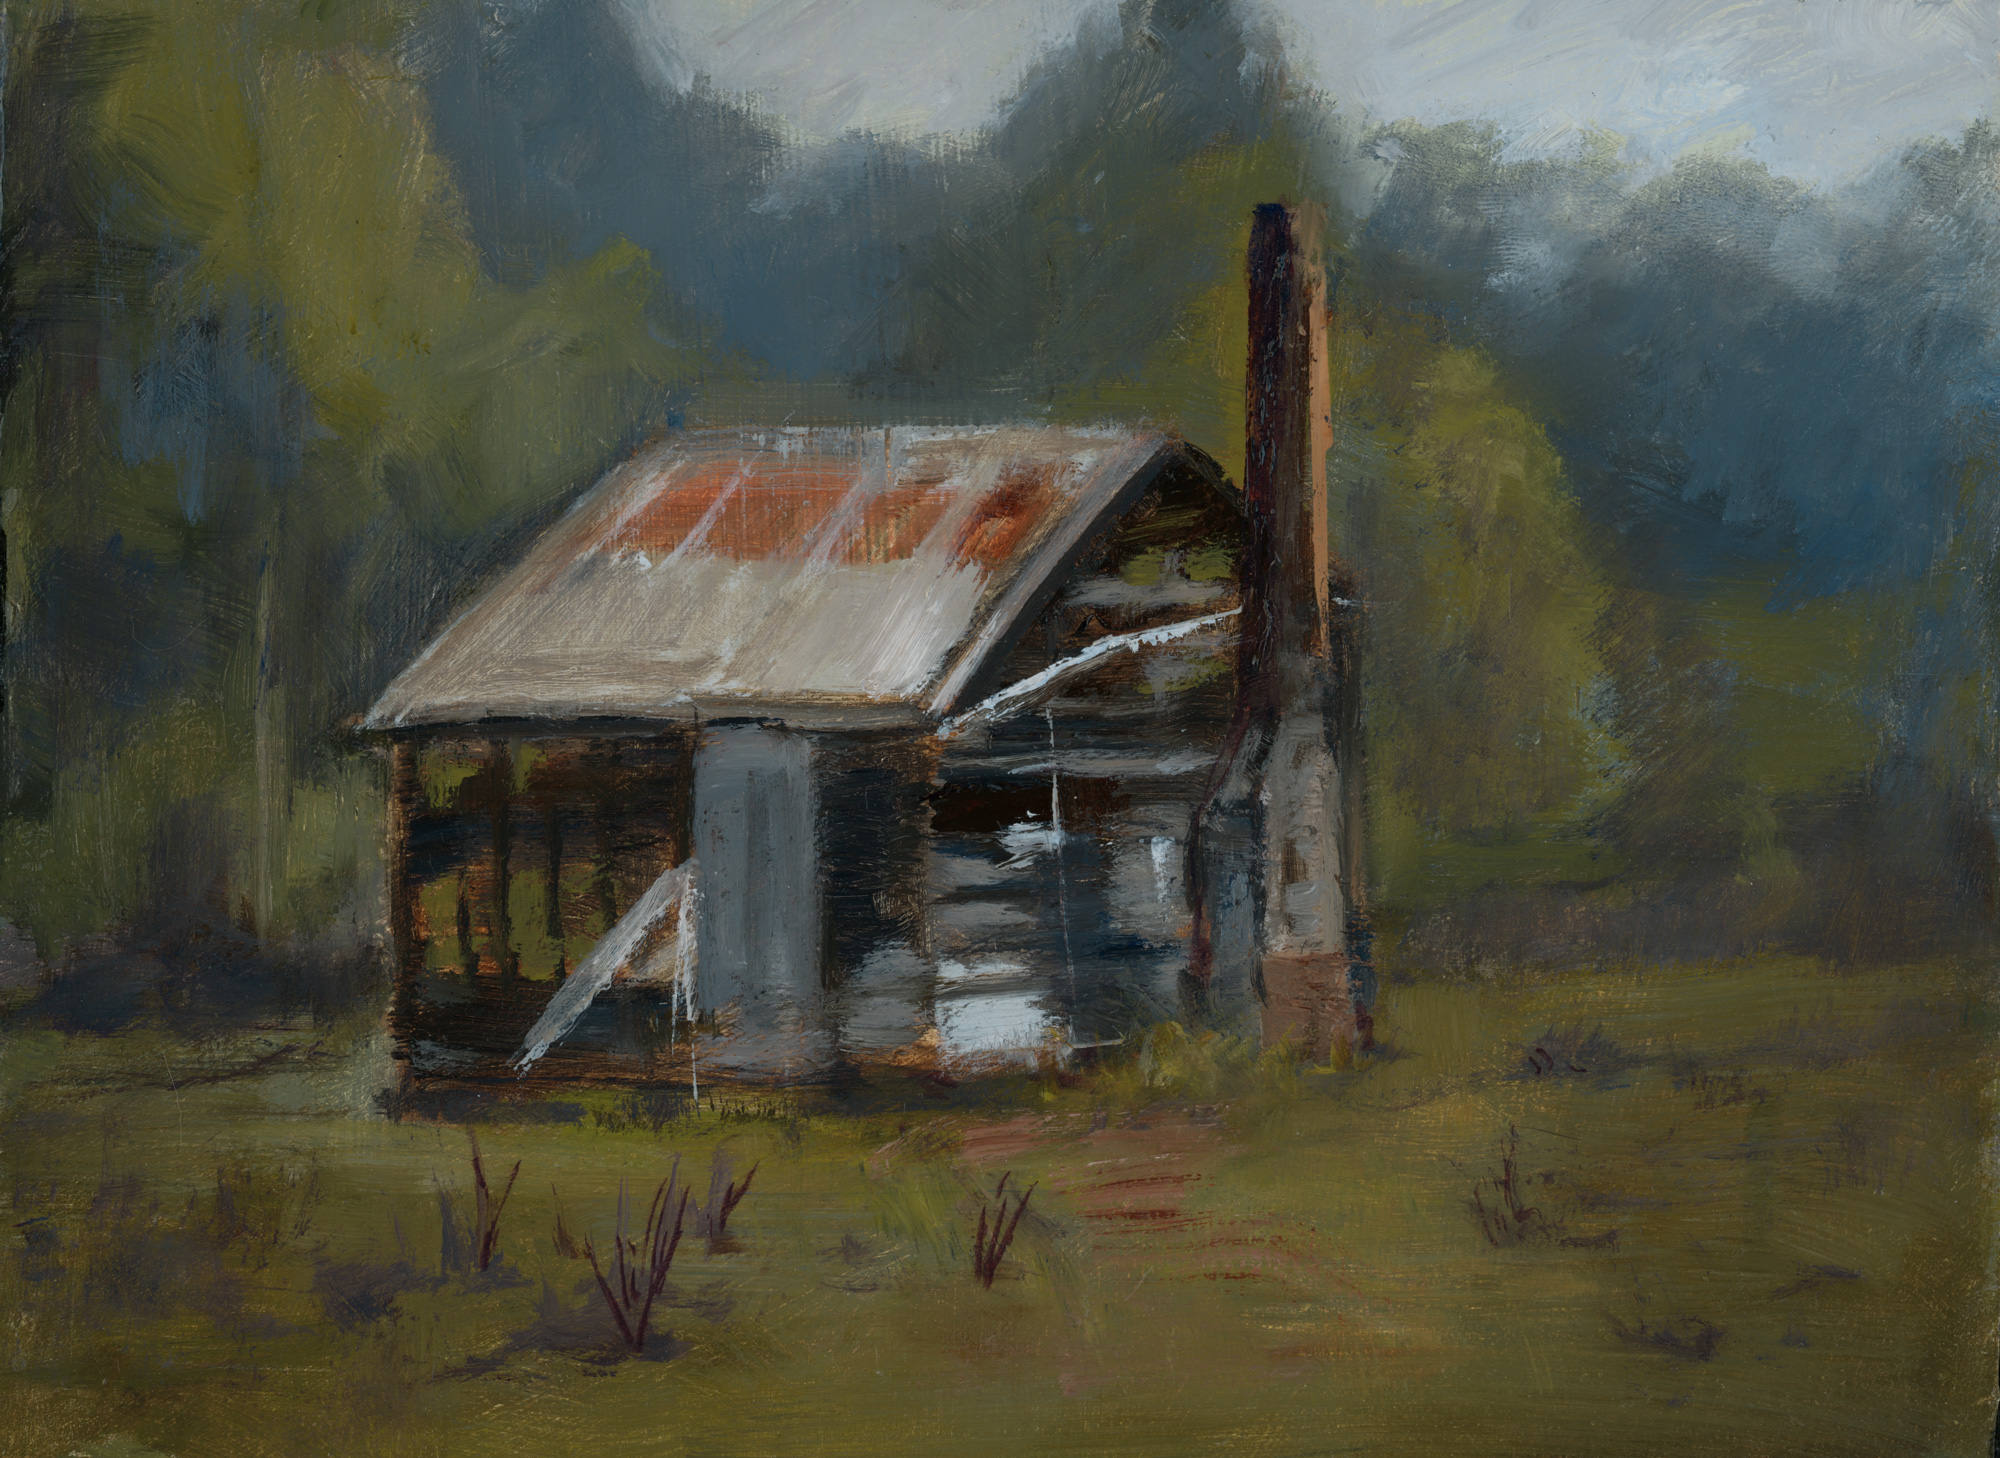 Peter Barker, Donnelly River Shack, 200 x 150 mm, oil on board, 2018